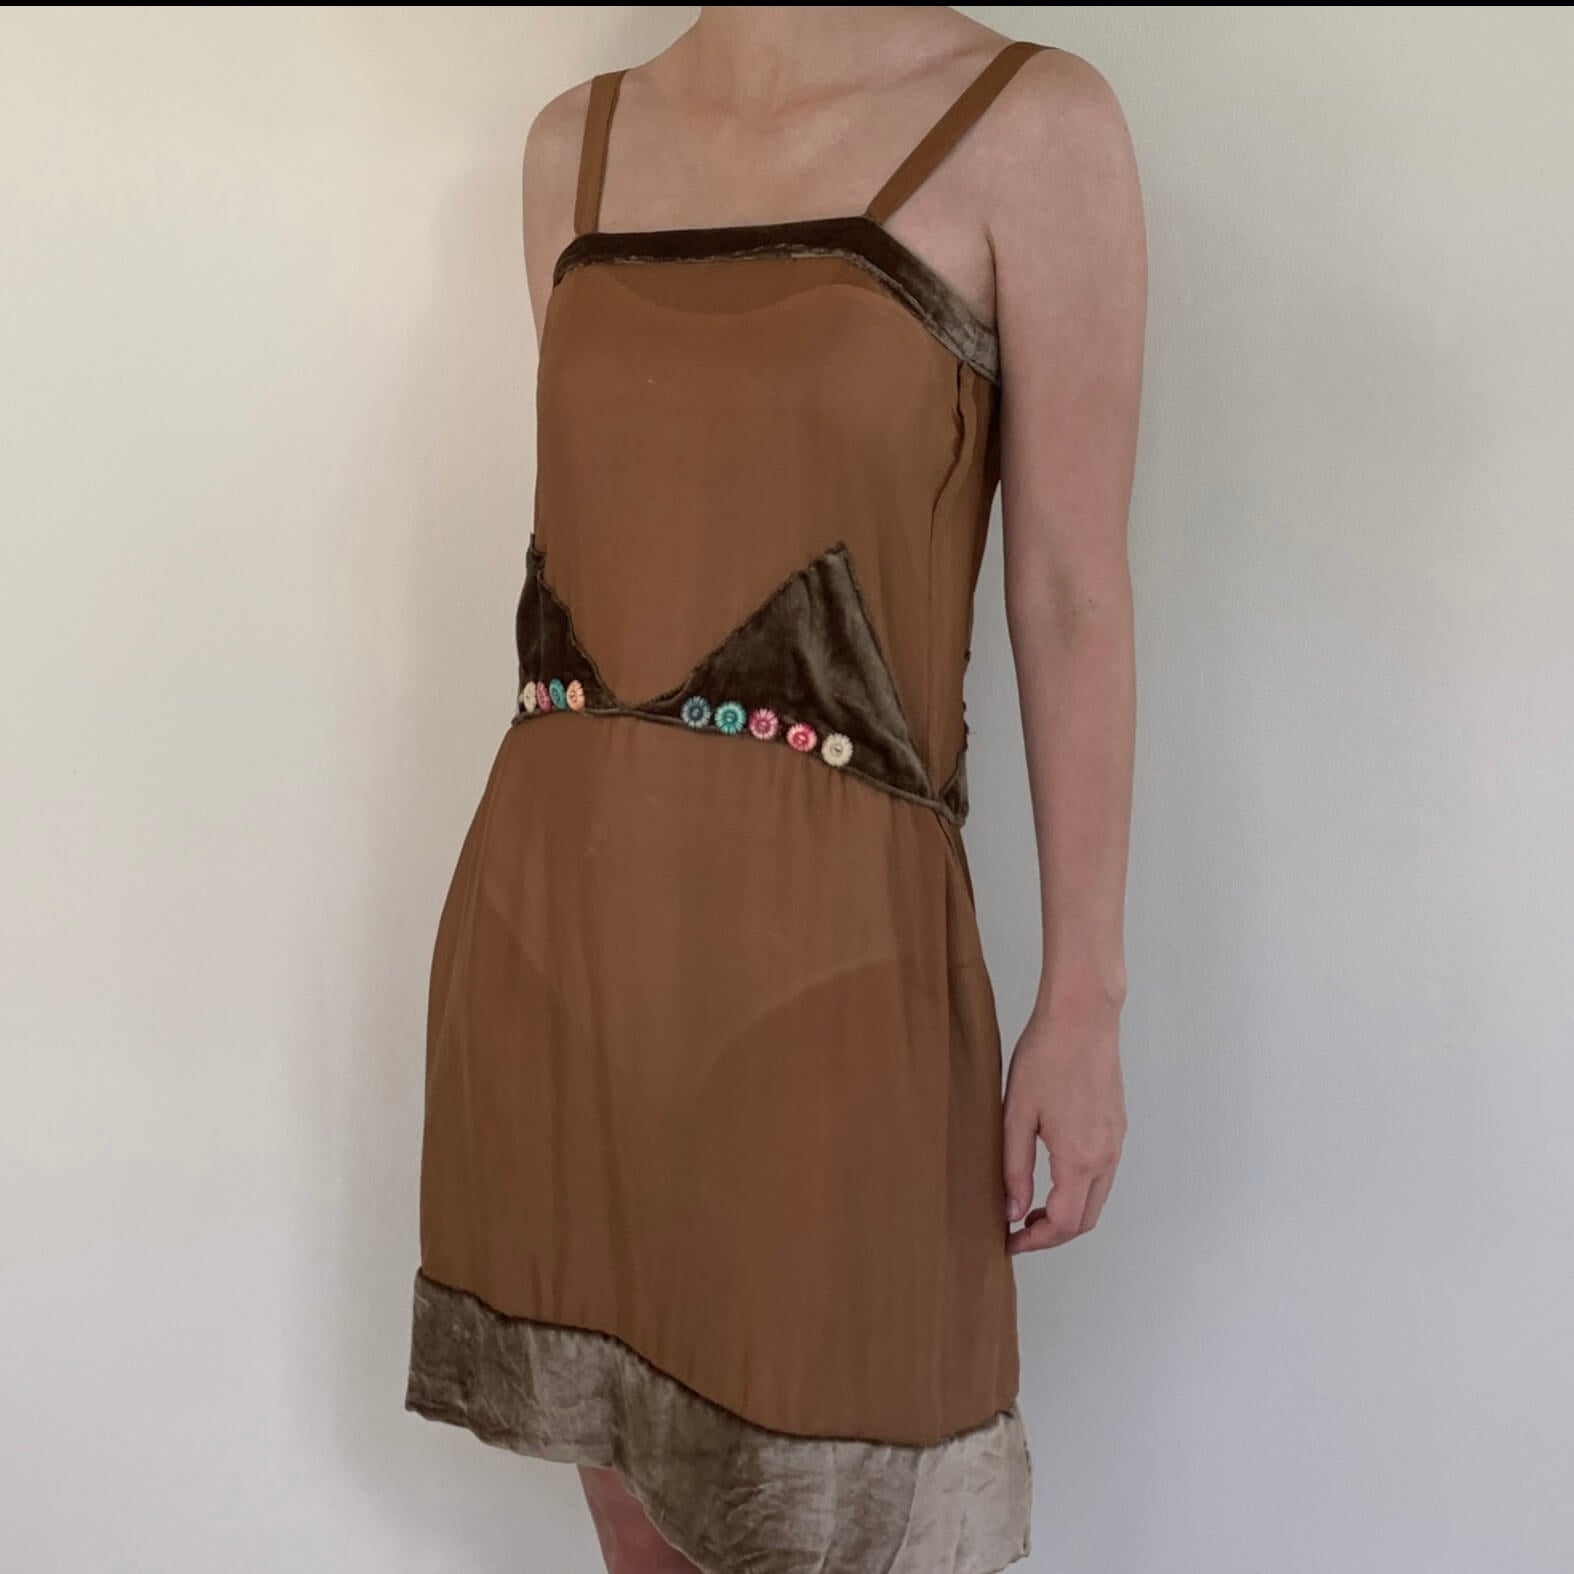 side view of the brown dress on a model